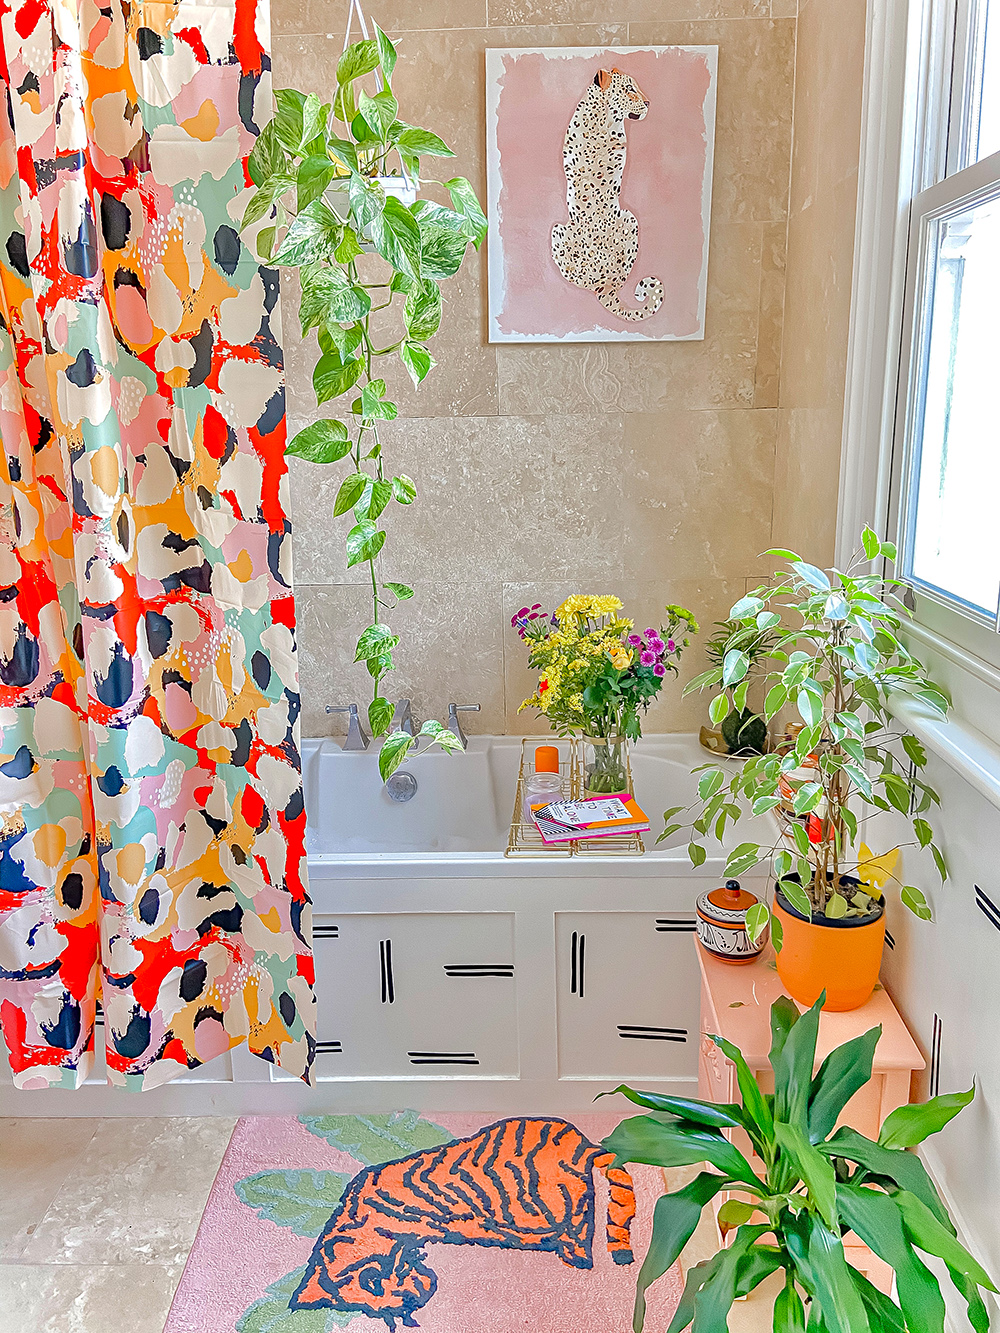 Stunning house tour of this colourful, bohemian rental home, with clashing patterns and lots of lush house plants.